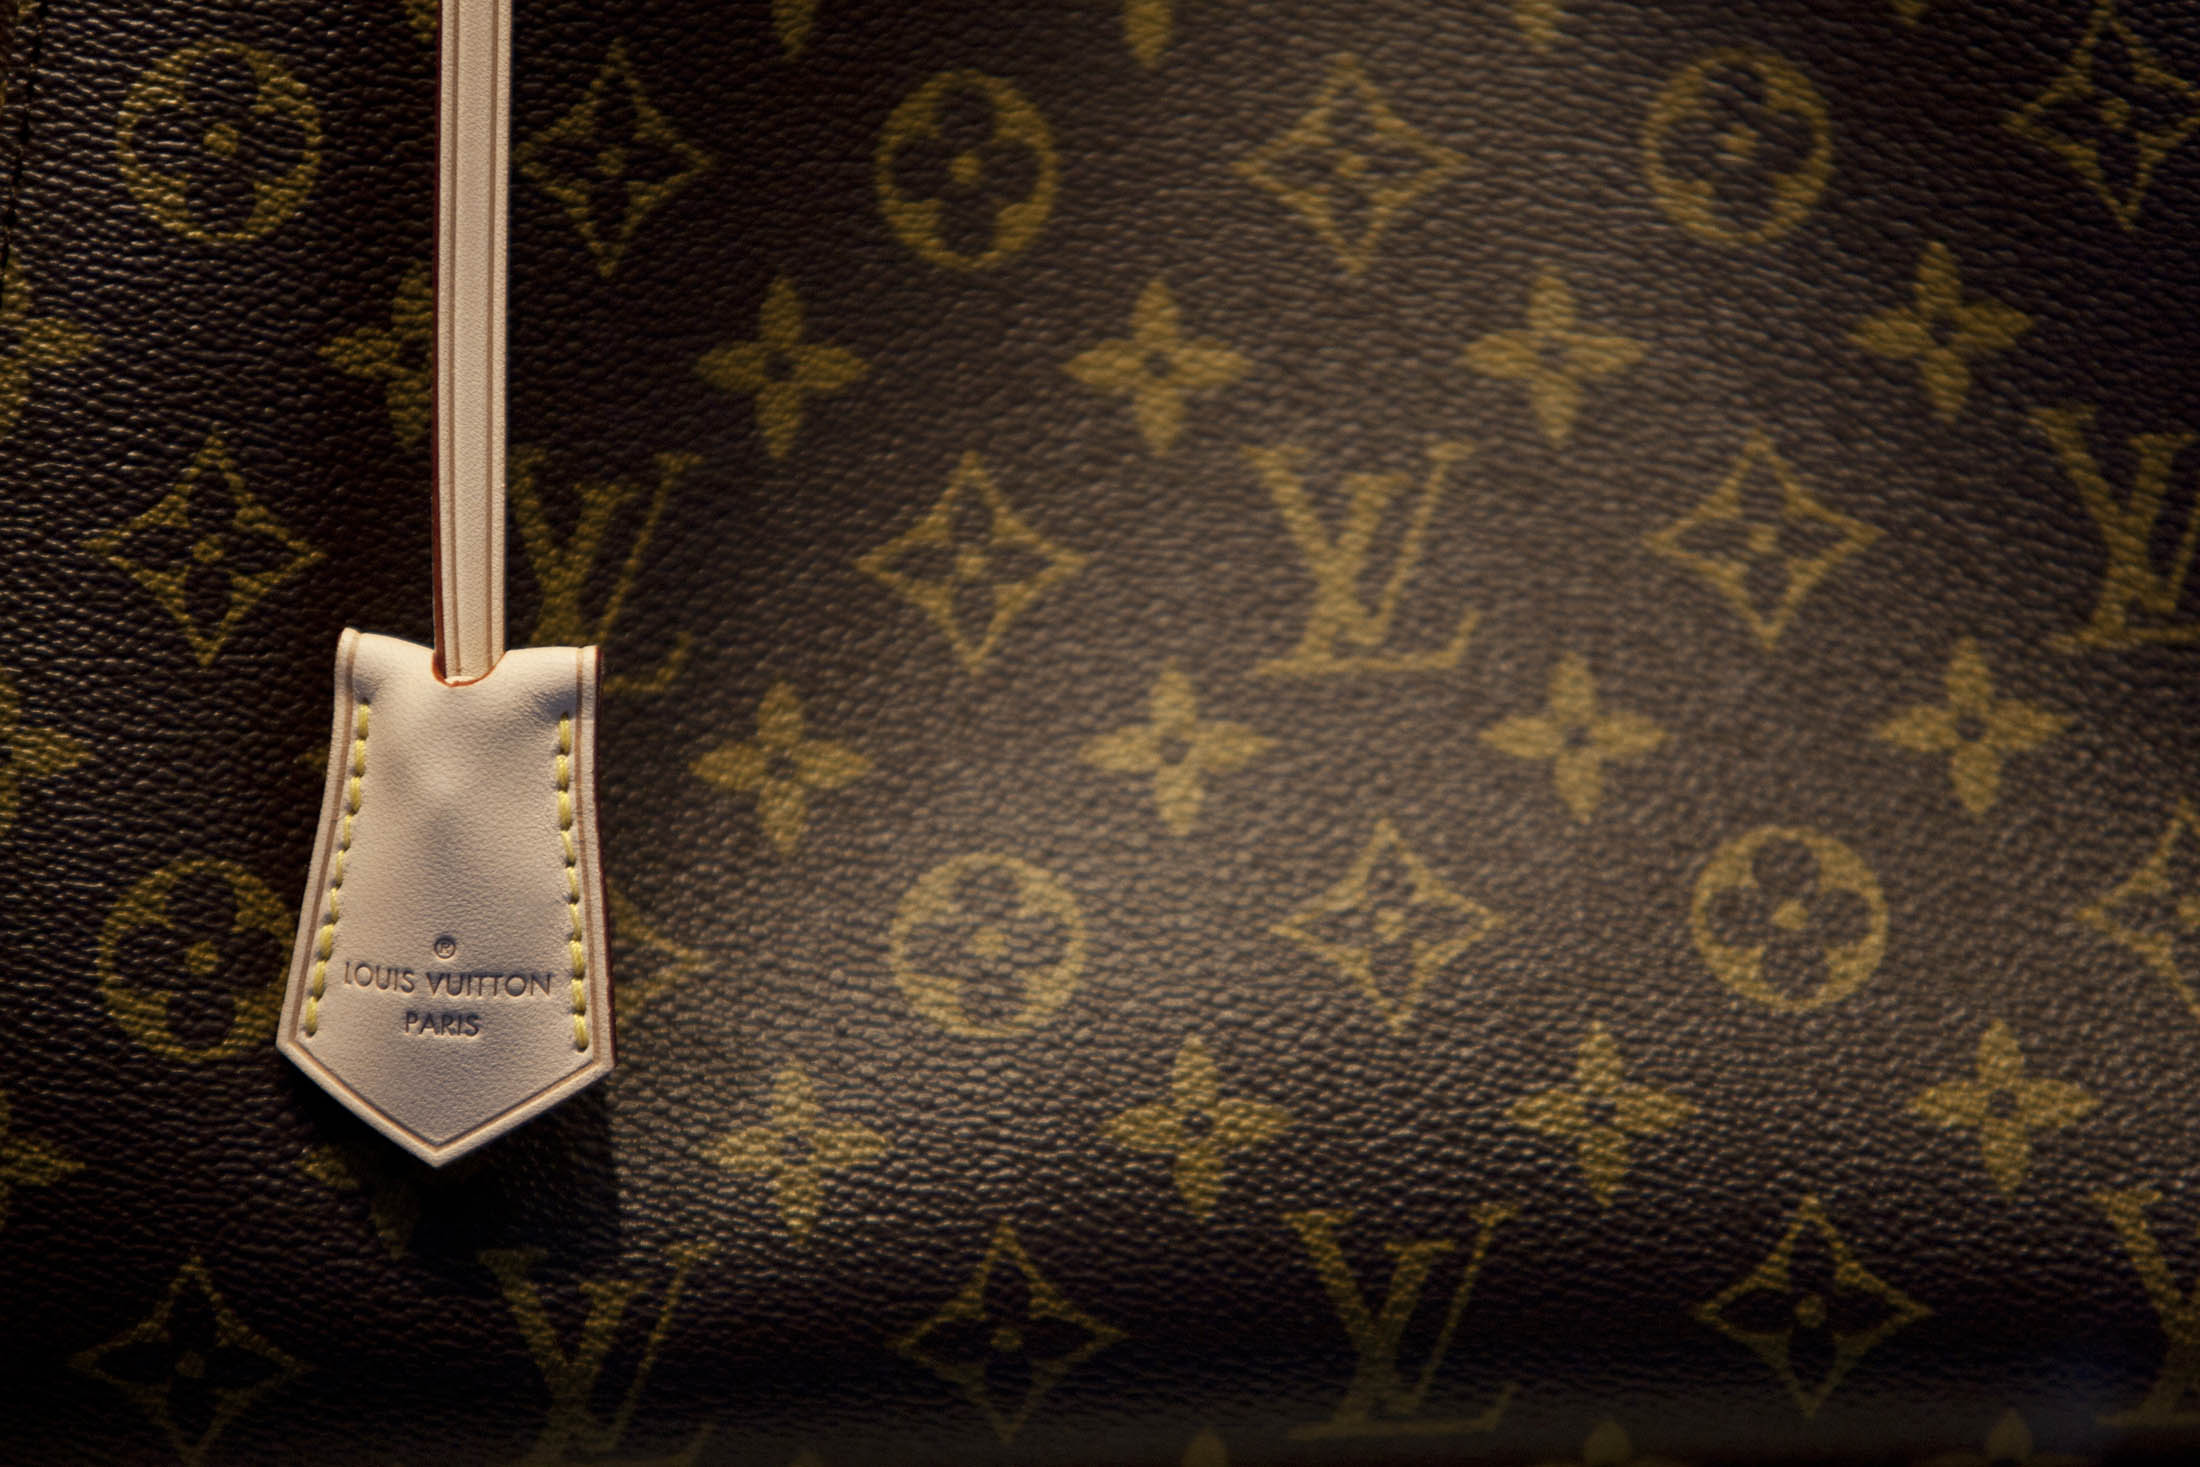 Louis Vuitton in Talks to Open Factory in U.S., CEO Burke Says - Bloomberg